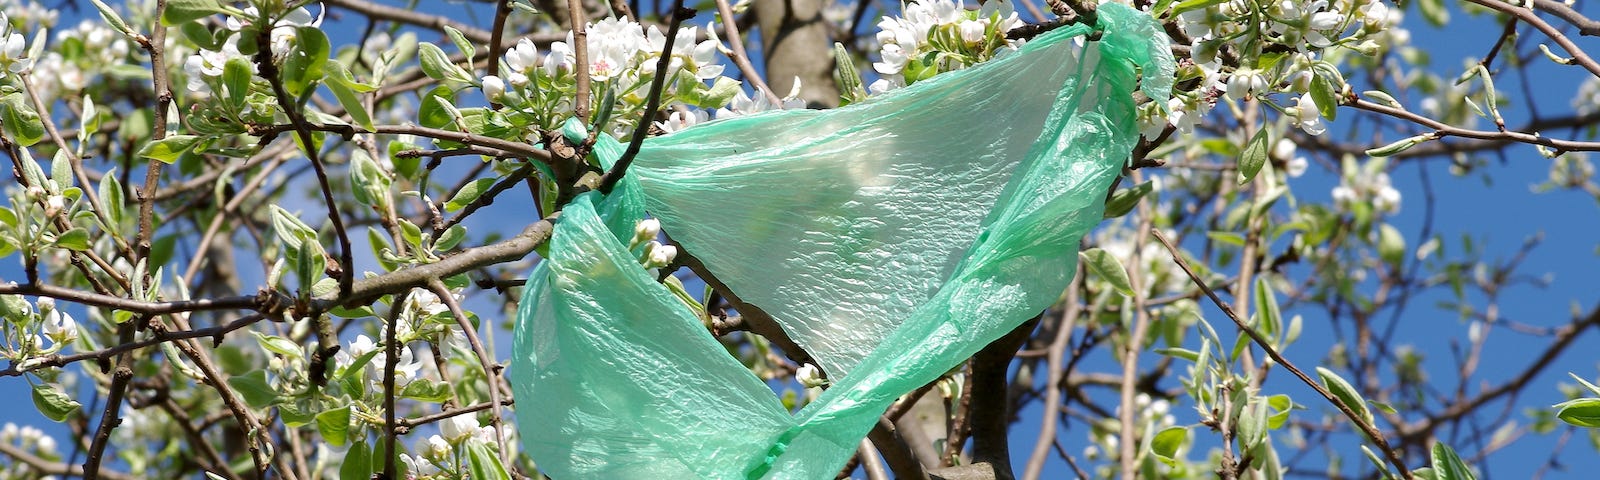 green plastic bag in a tree